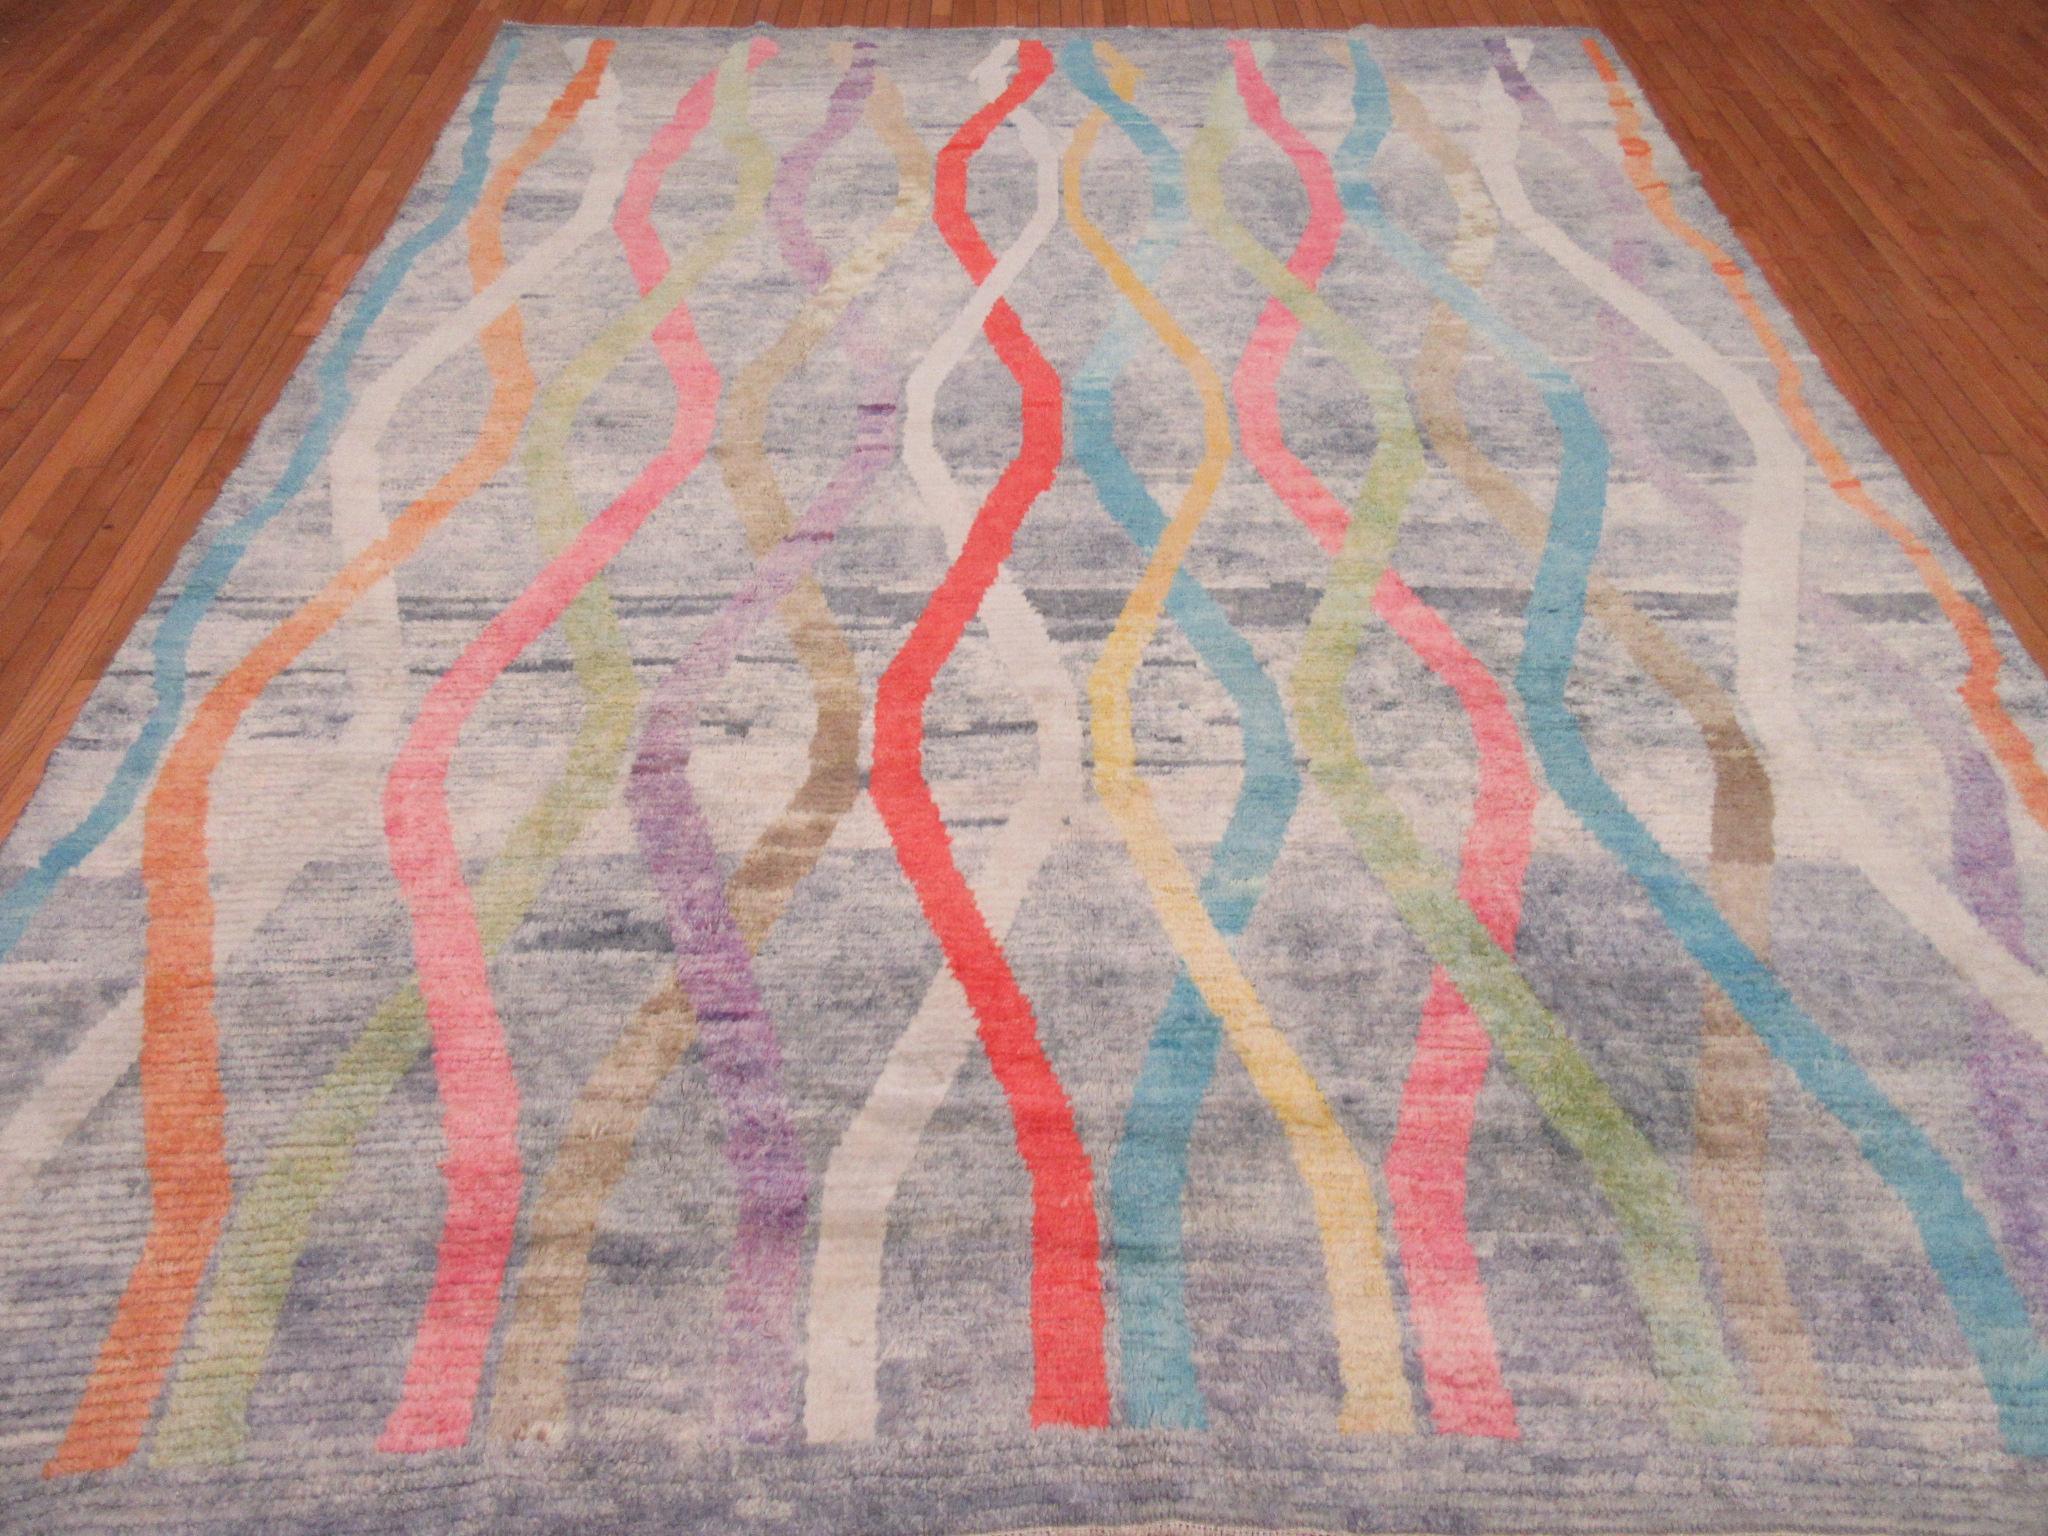 This is a new hand knotted rug from Turkey. It has a larger knotted Oushak weave and a modern ribbon design in rich colors. It is a large and fun rug for any room. It is made with fine Turkish wool and measures 9' 3'' x 12'.